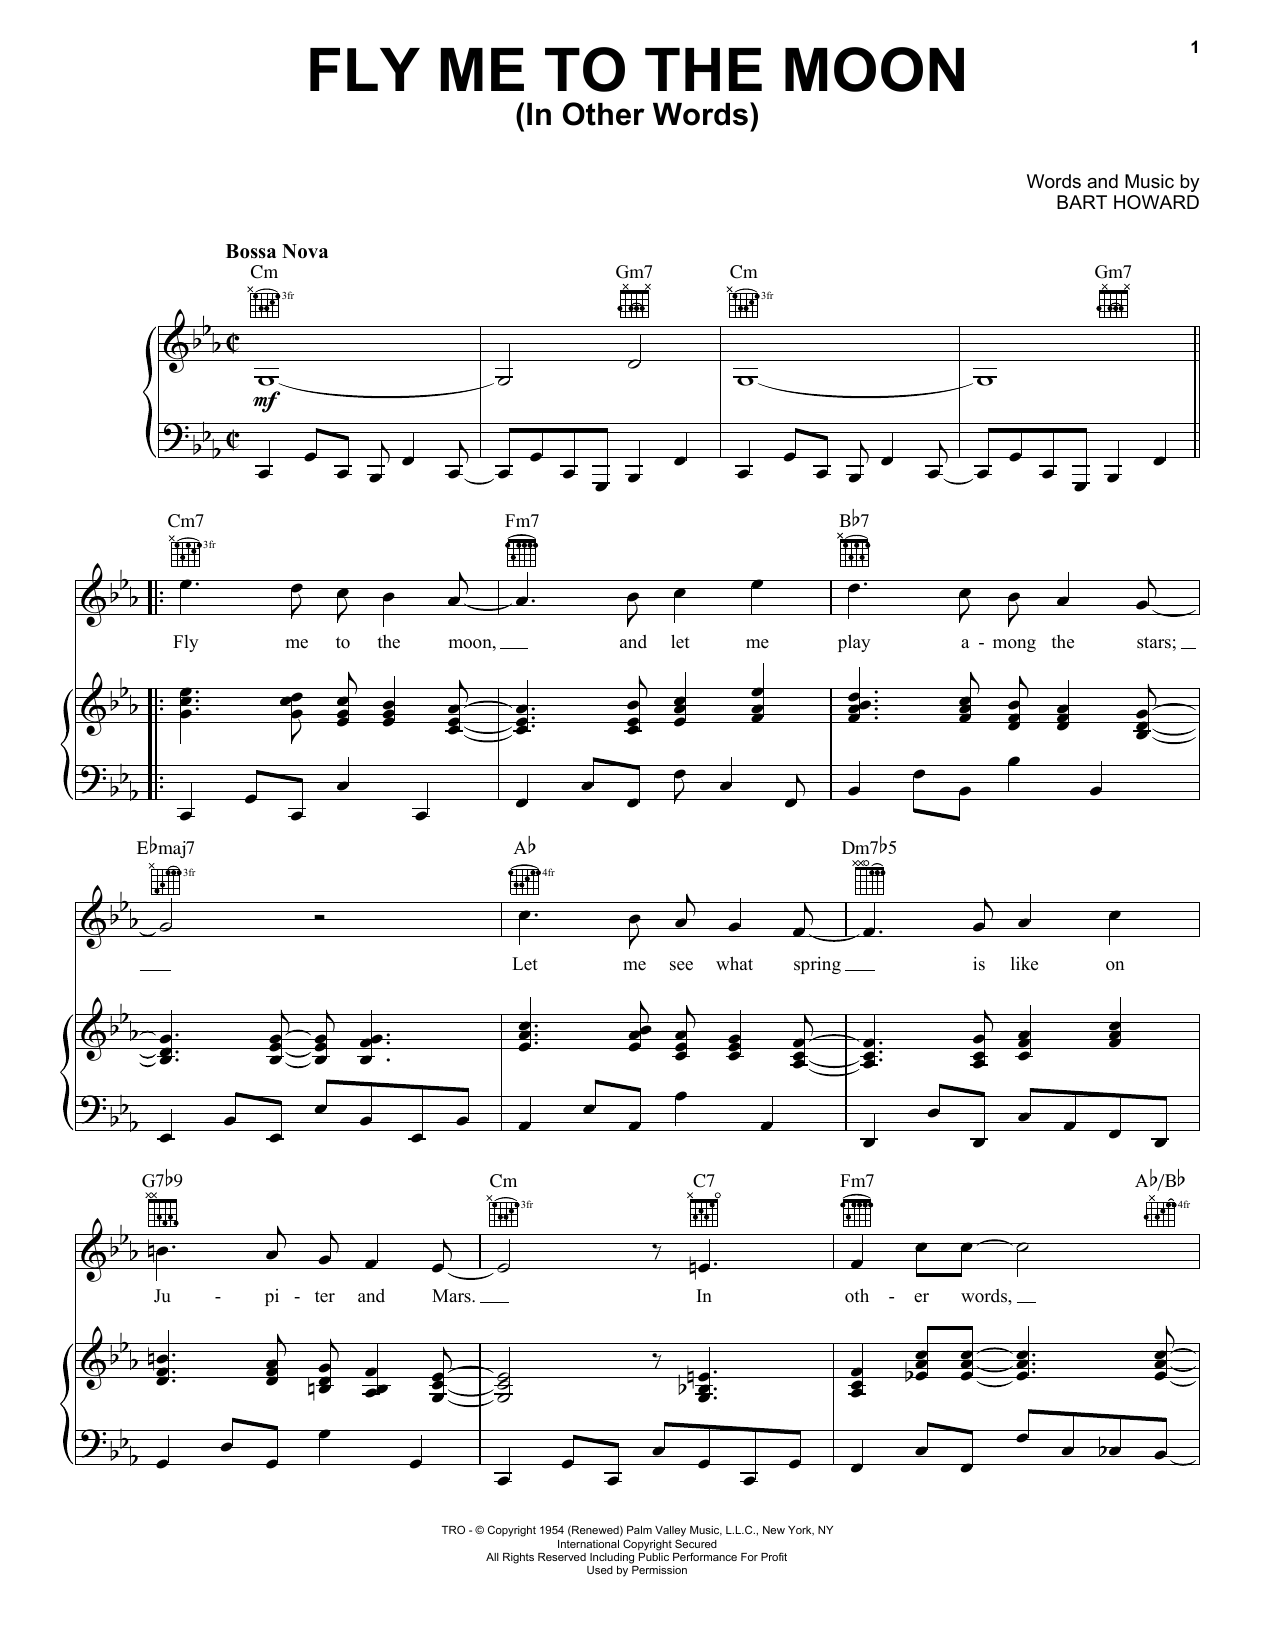 Frank Sinatra Fly Me To The Moon (In Other Words) sheet music notes and chords. Download Printable PDF.